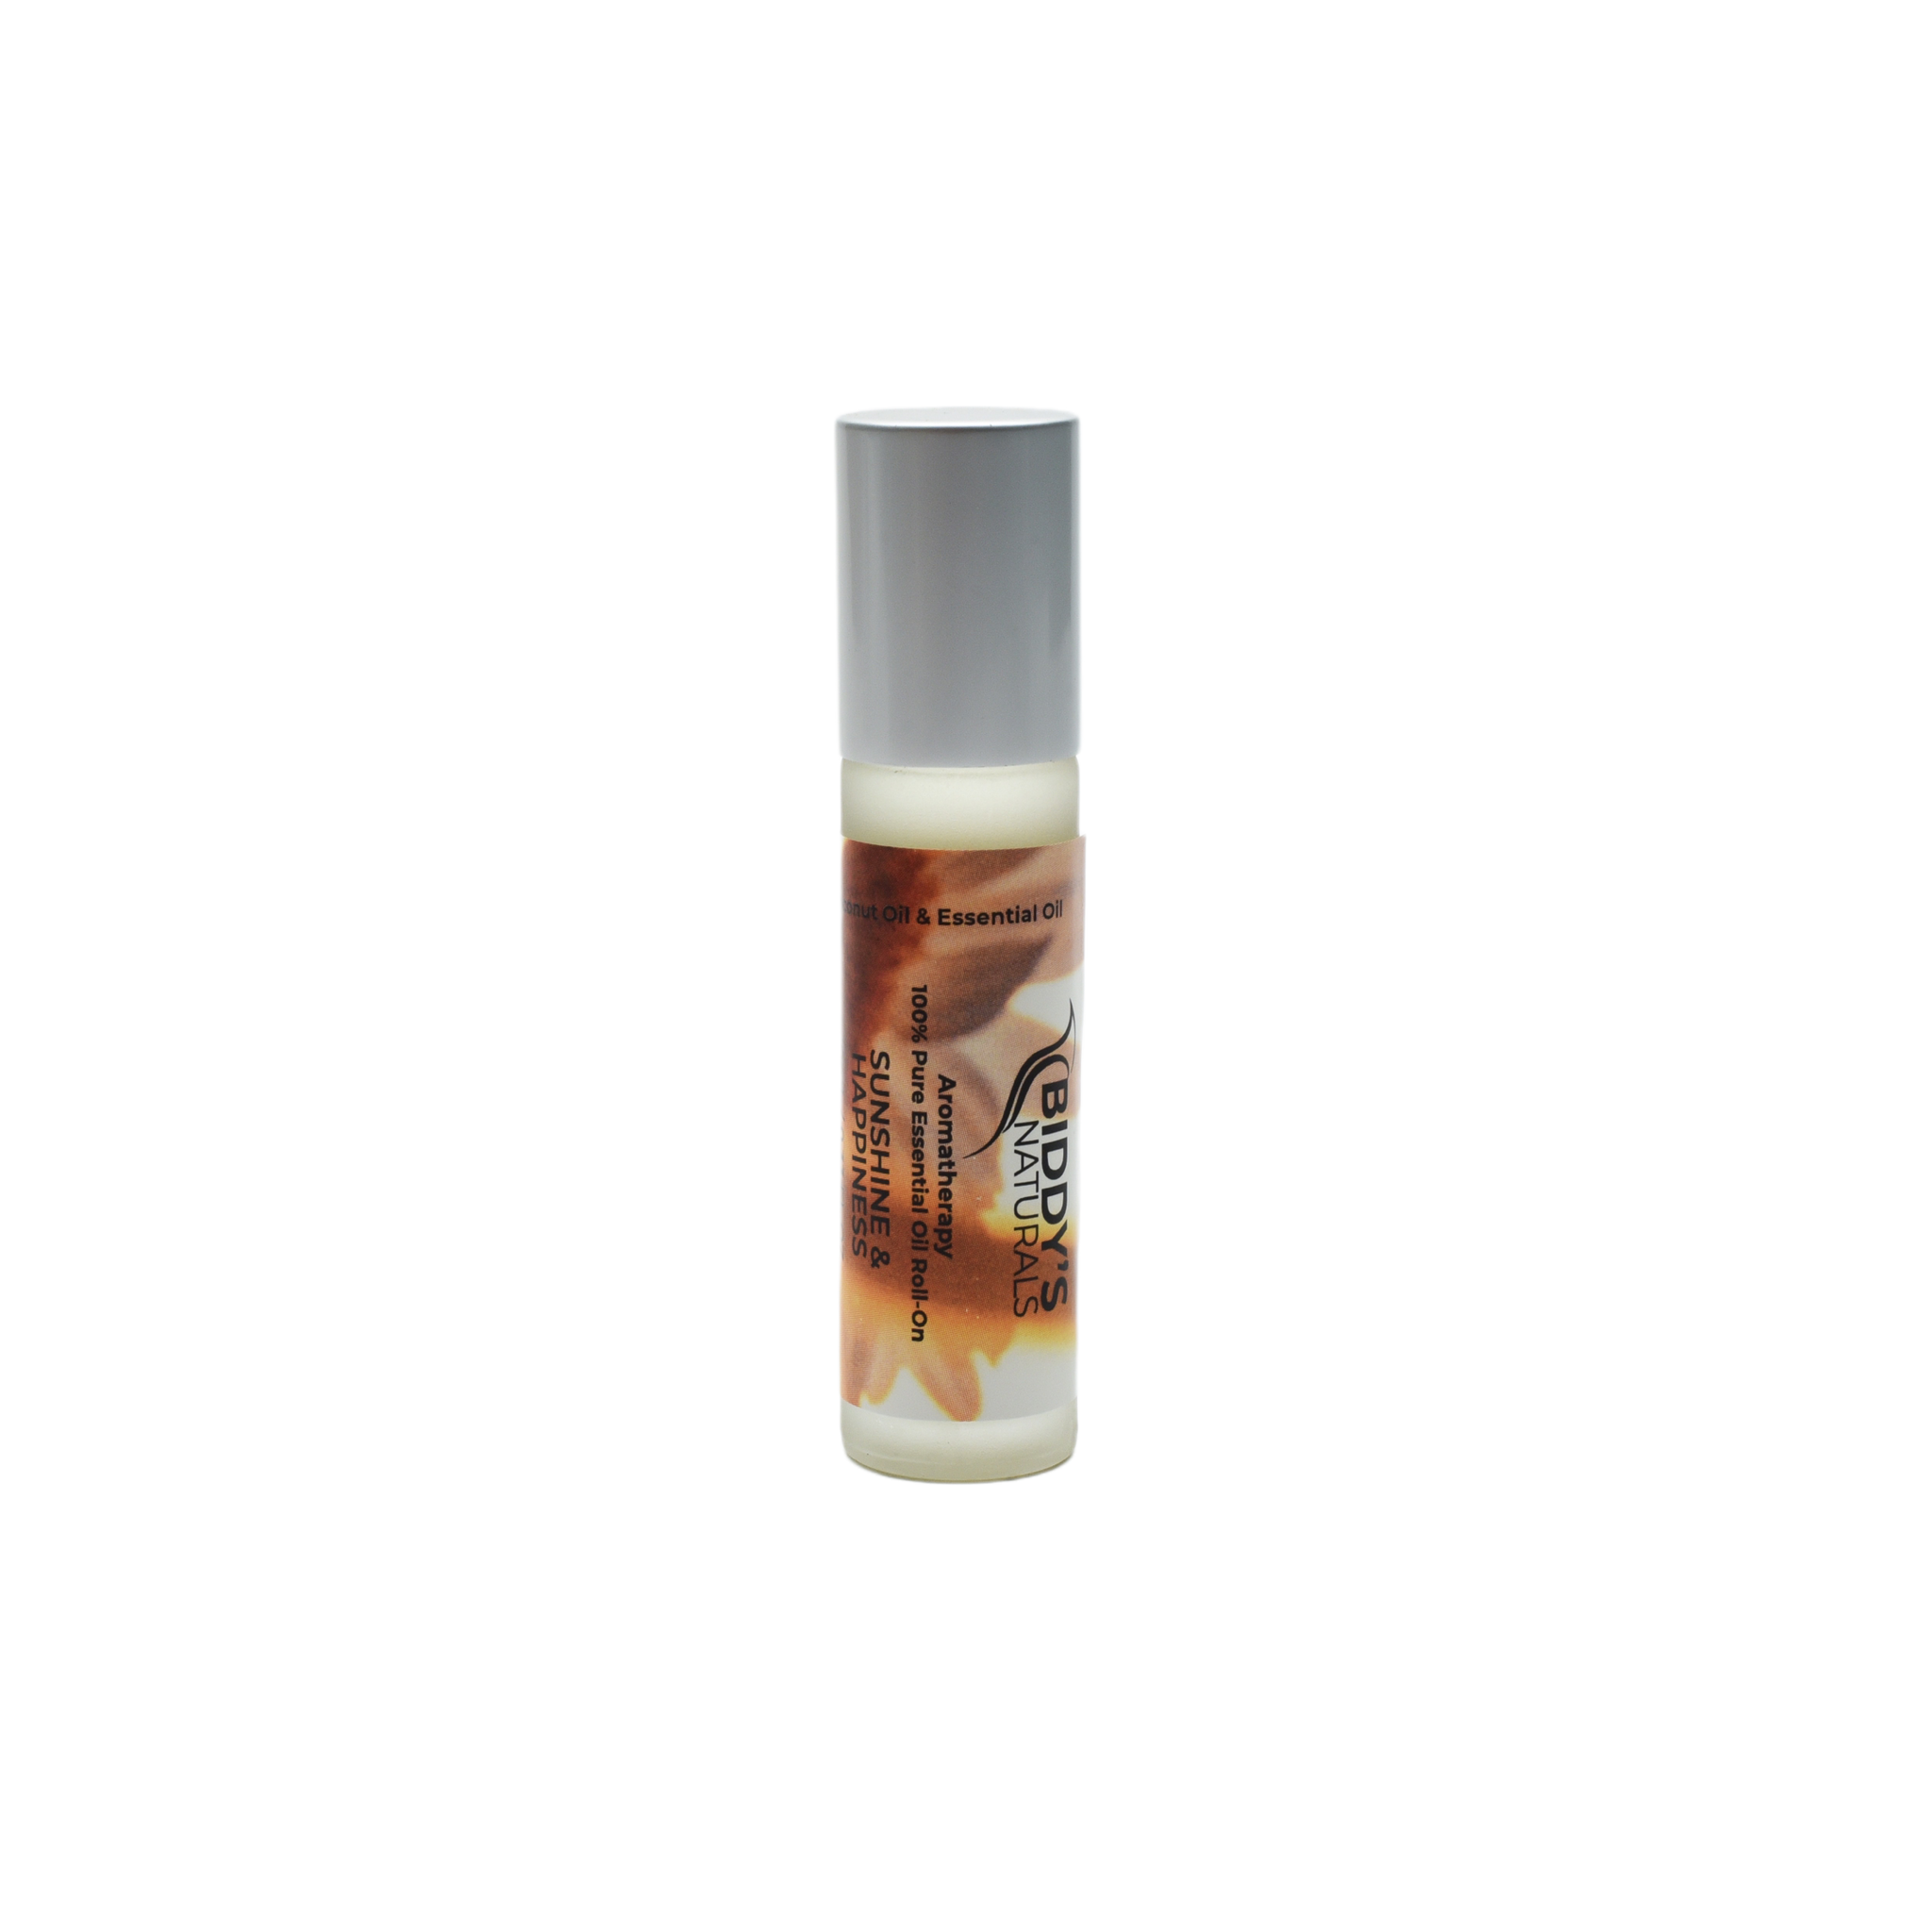 Sunshine & Happiness Roll On made with 100% Pure Essential Oils Clementine, Pink Grapefruit, Lemon & Orange